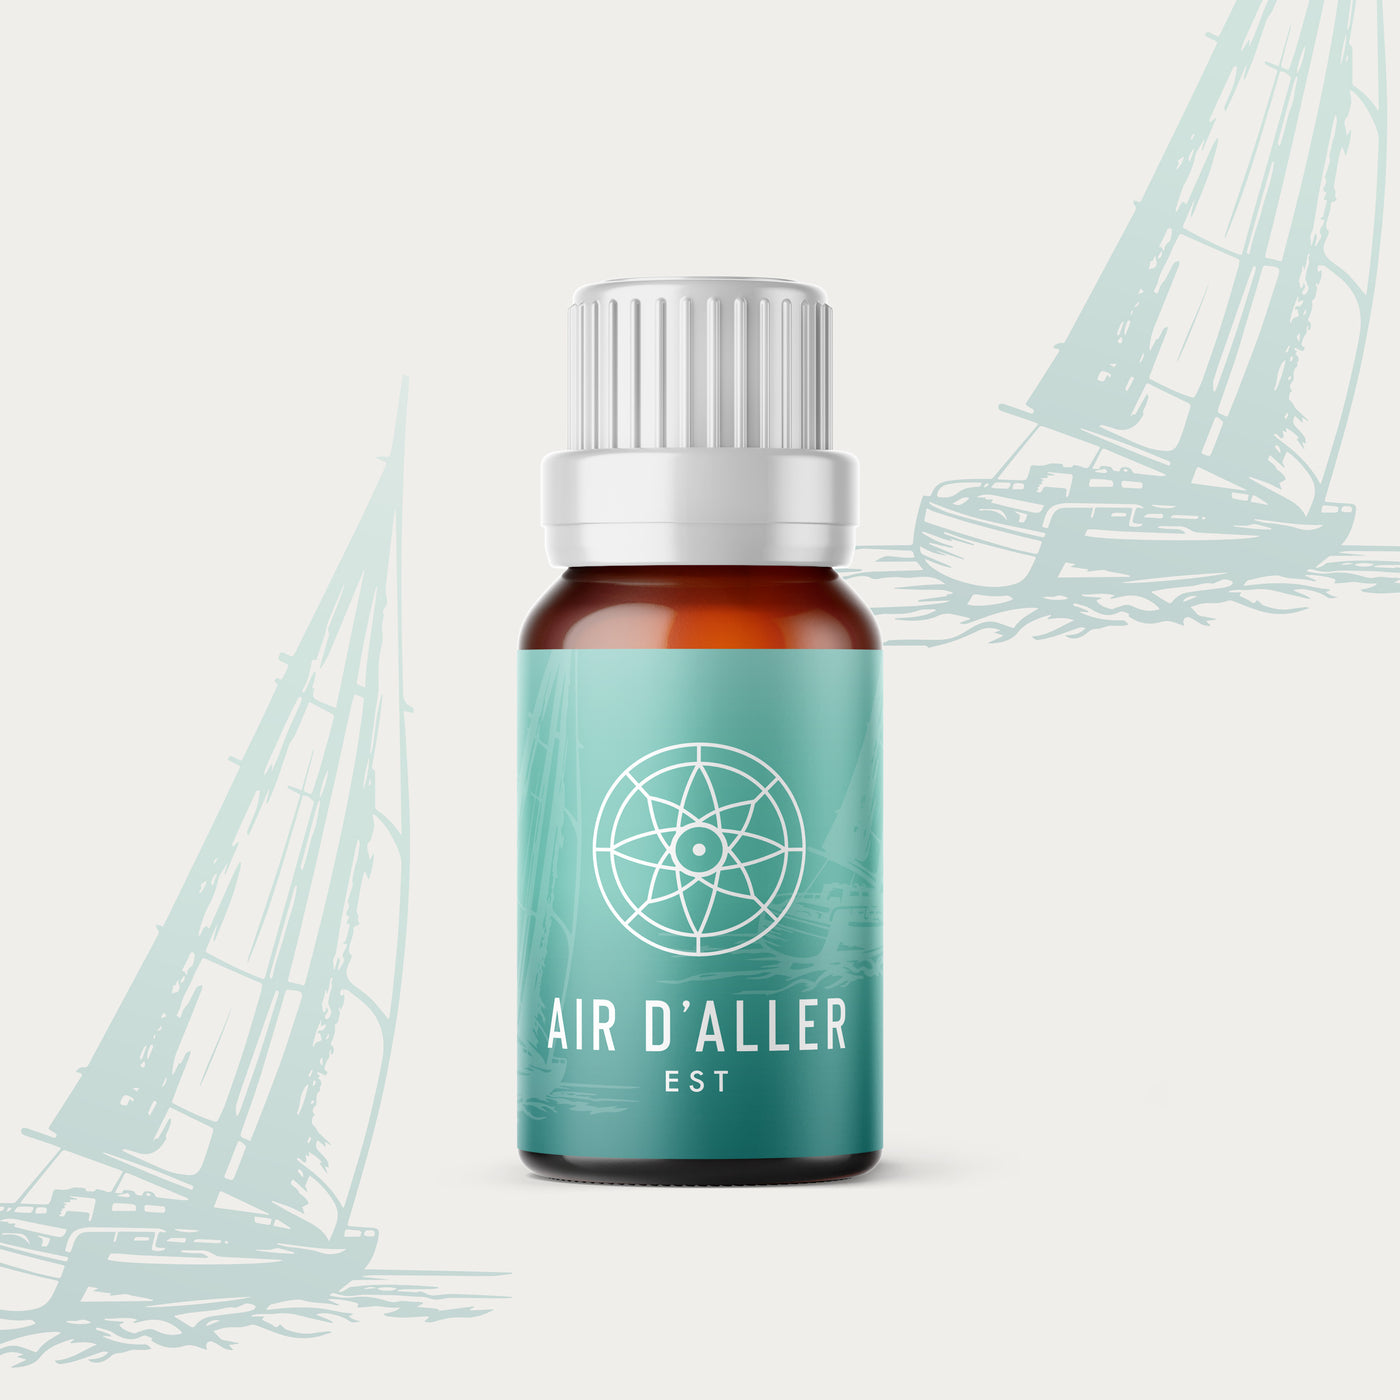 Air d'aller - Synergie aromatique 100% pure